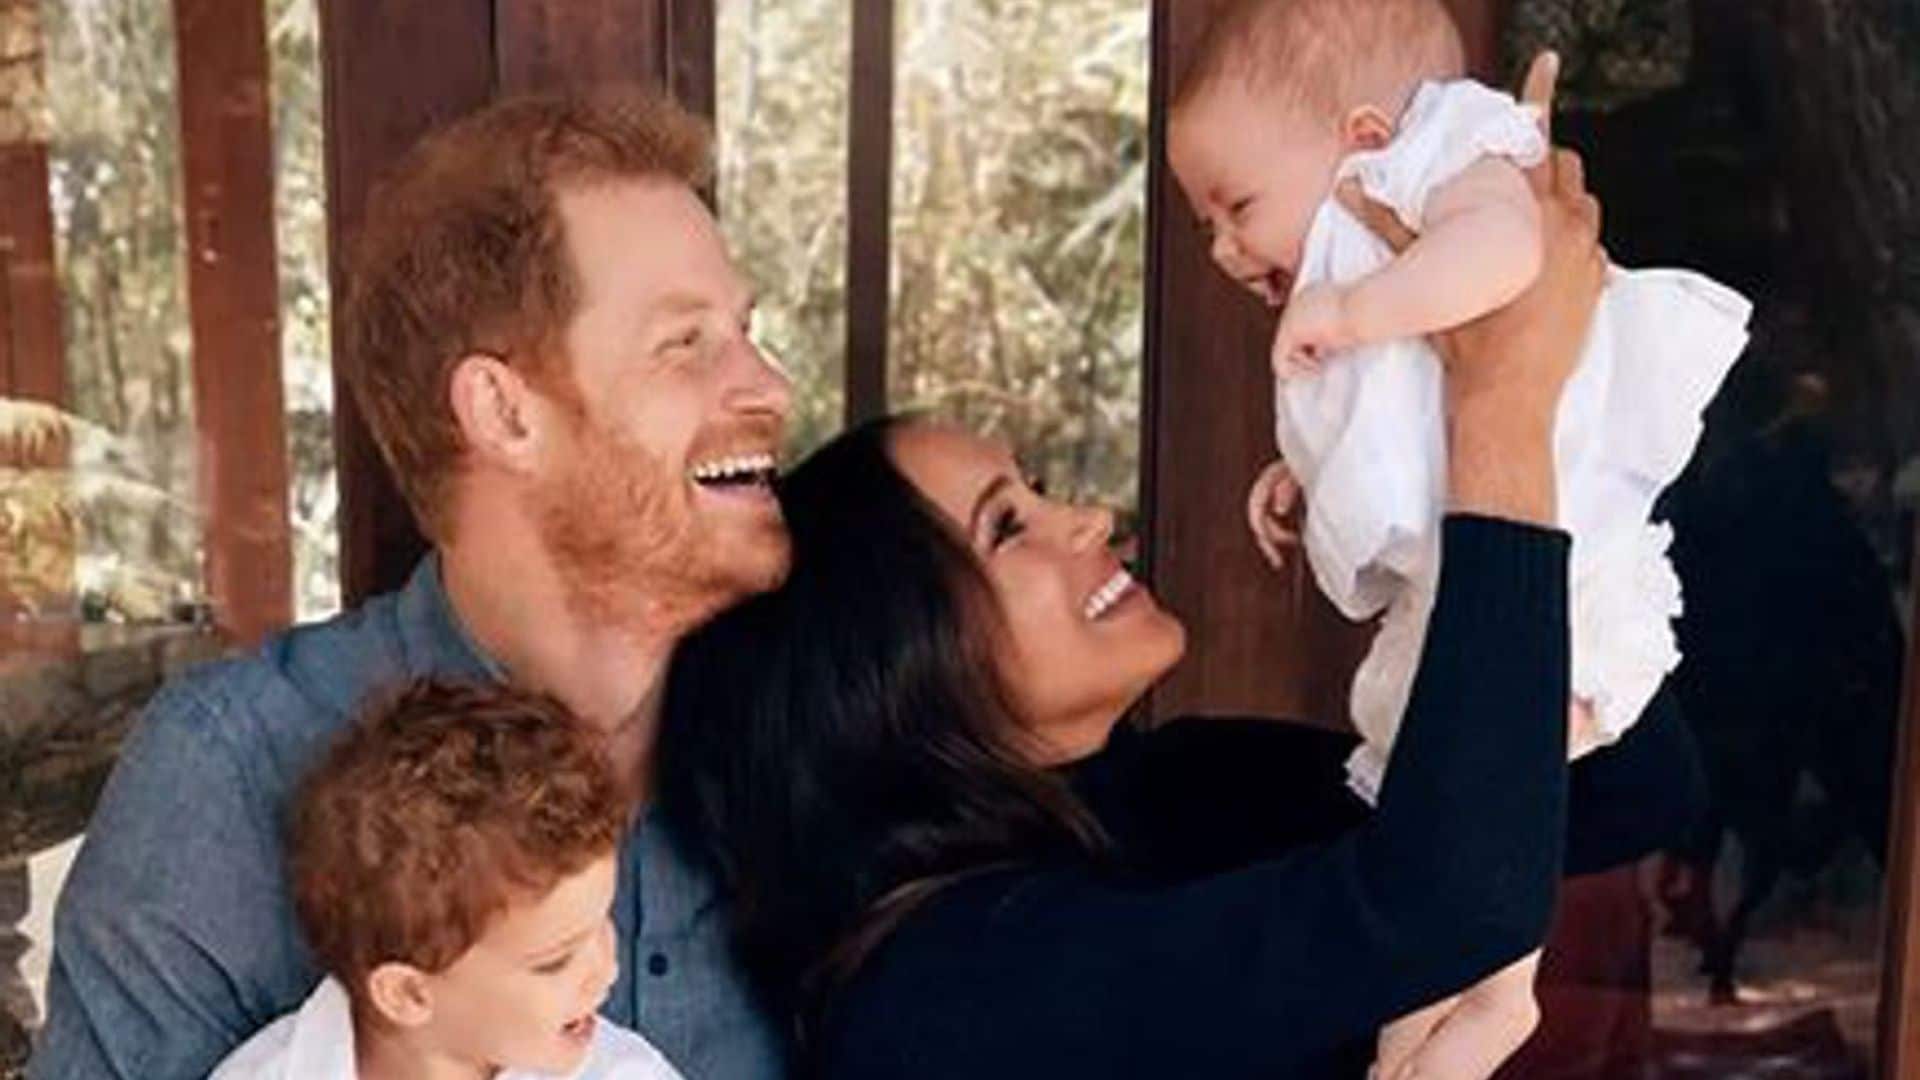 Meghan and Harry’s daughter Lilibet Diana stars in family holiday card with big brother Archie